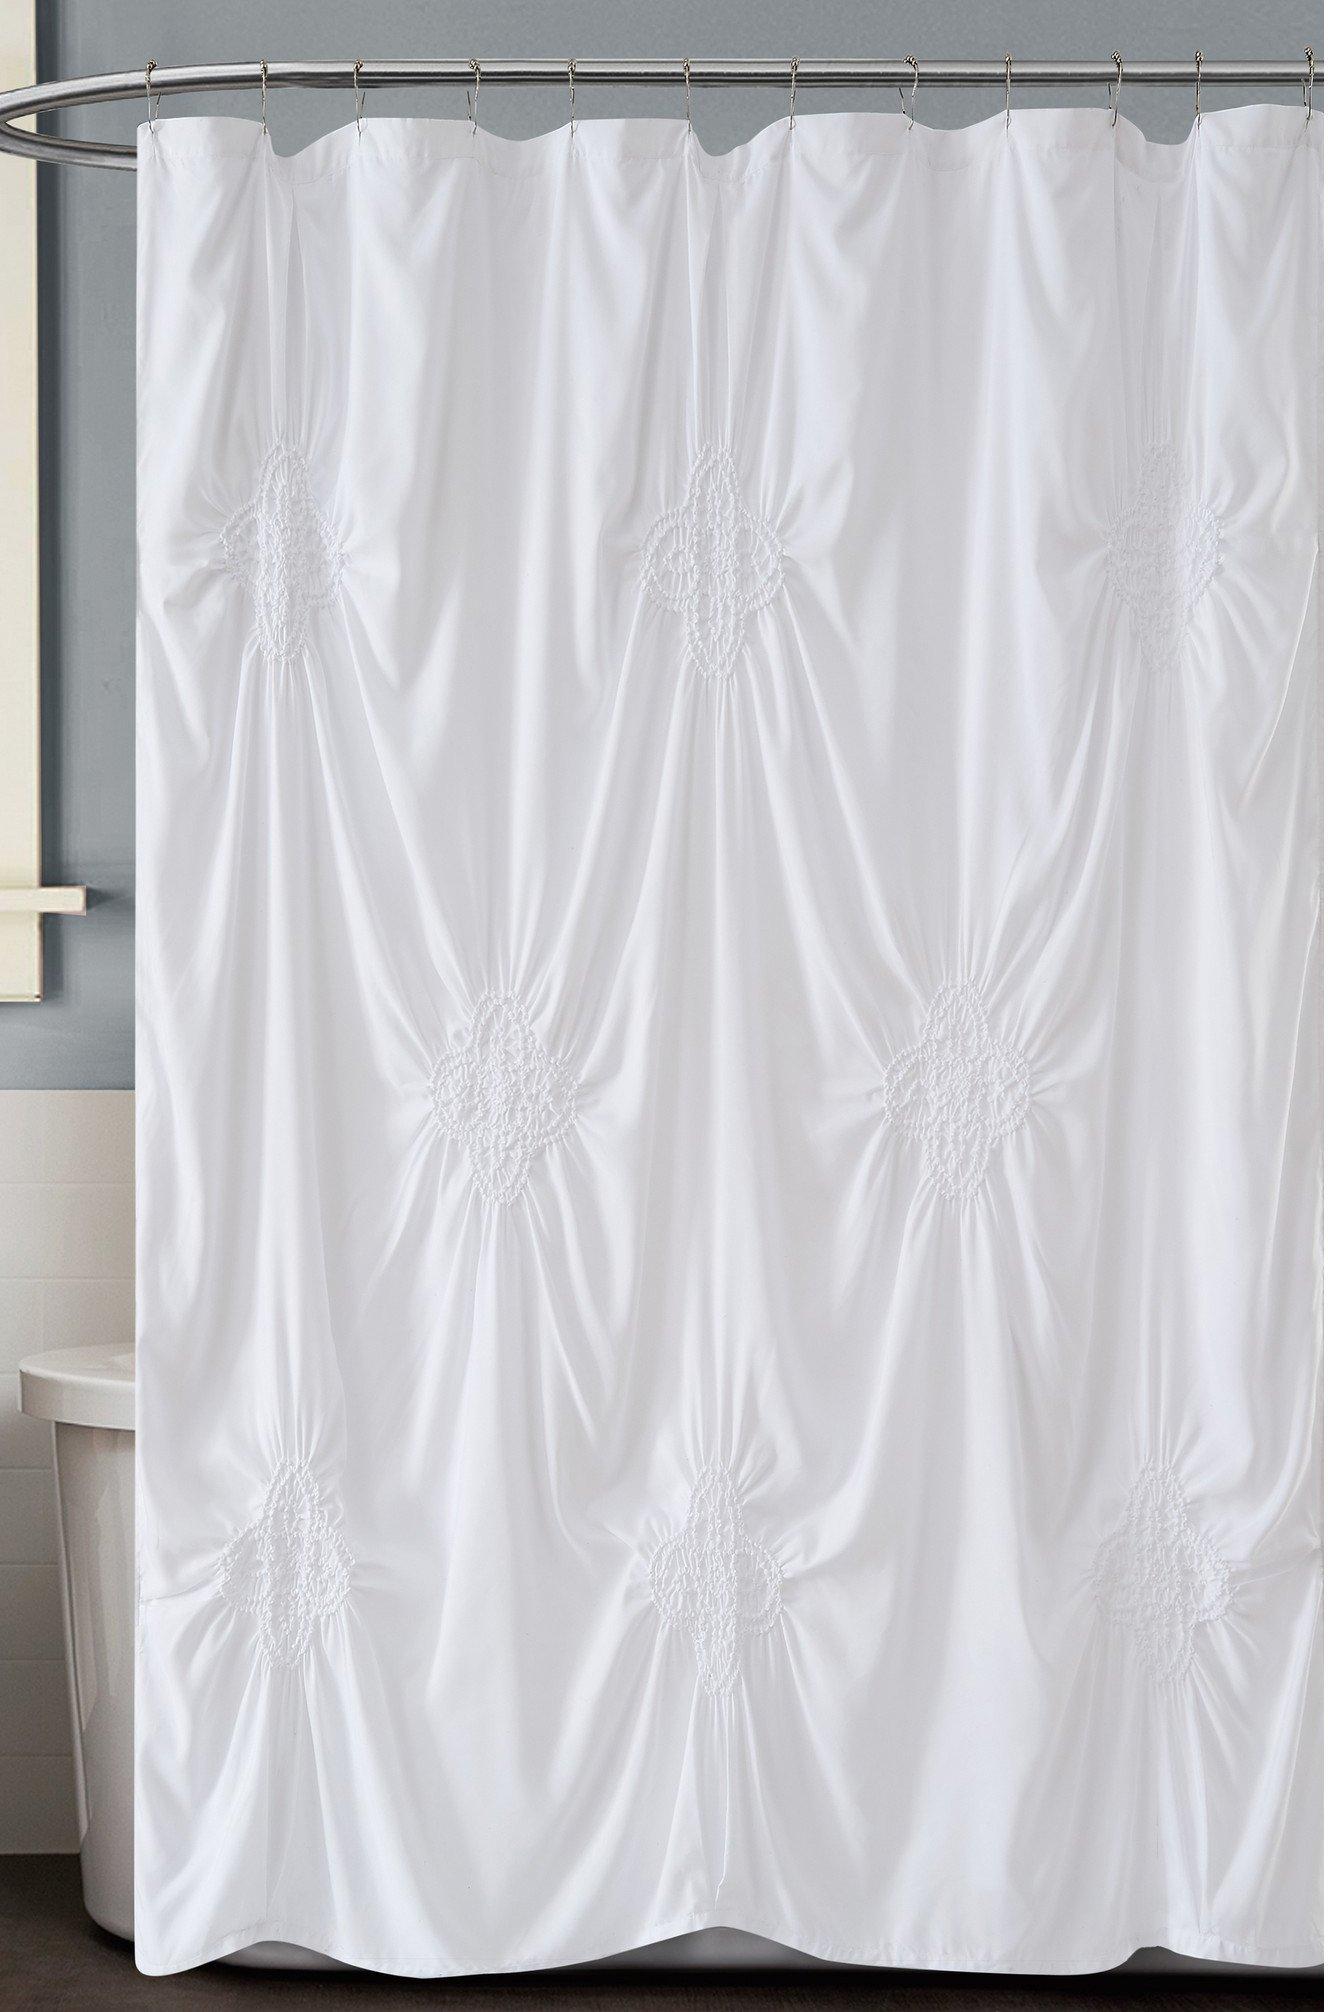 Photos - Other sanitary accessories Christian Siriano NY Georgia Rouched Shower Curtain